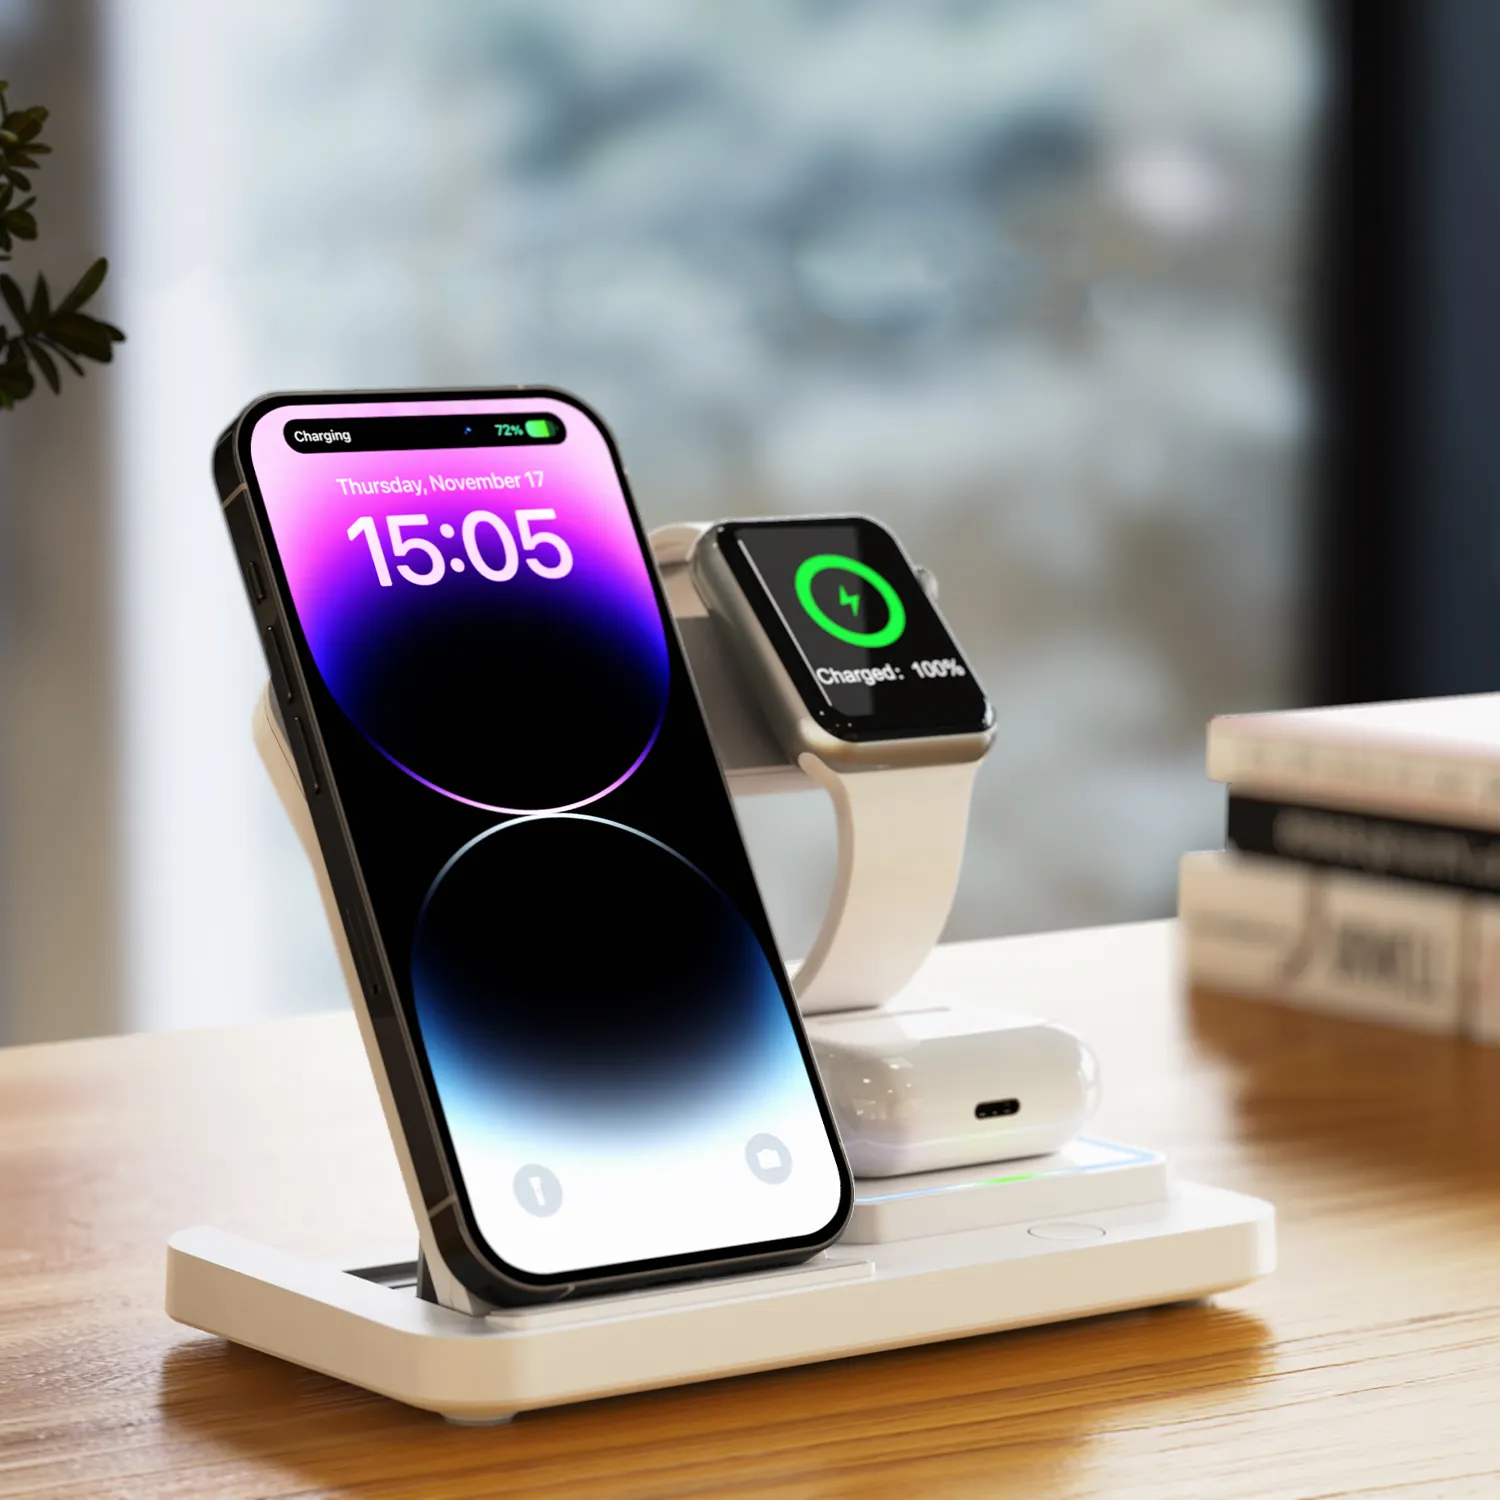 High quality 30W 4 in 1 fast Wireless Charger for mobile phones headphones and watches with small night light With 30W Plug